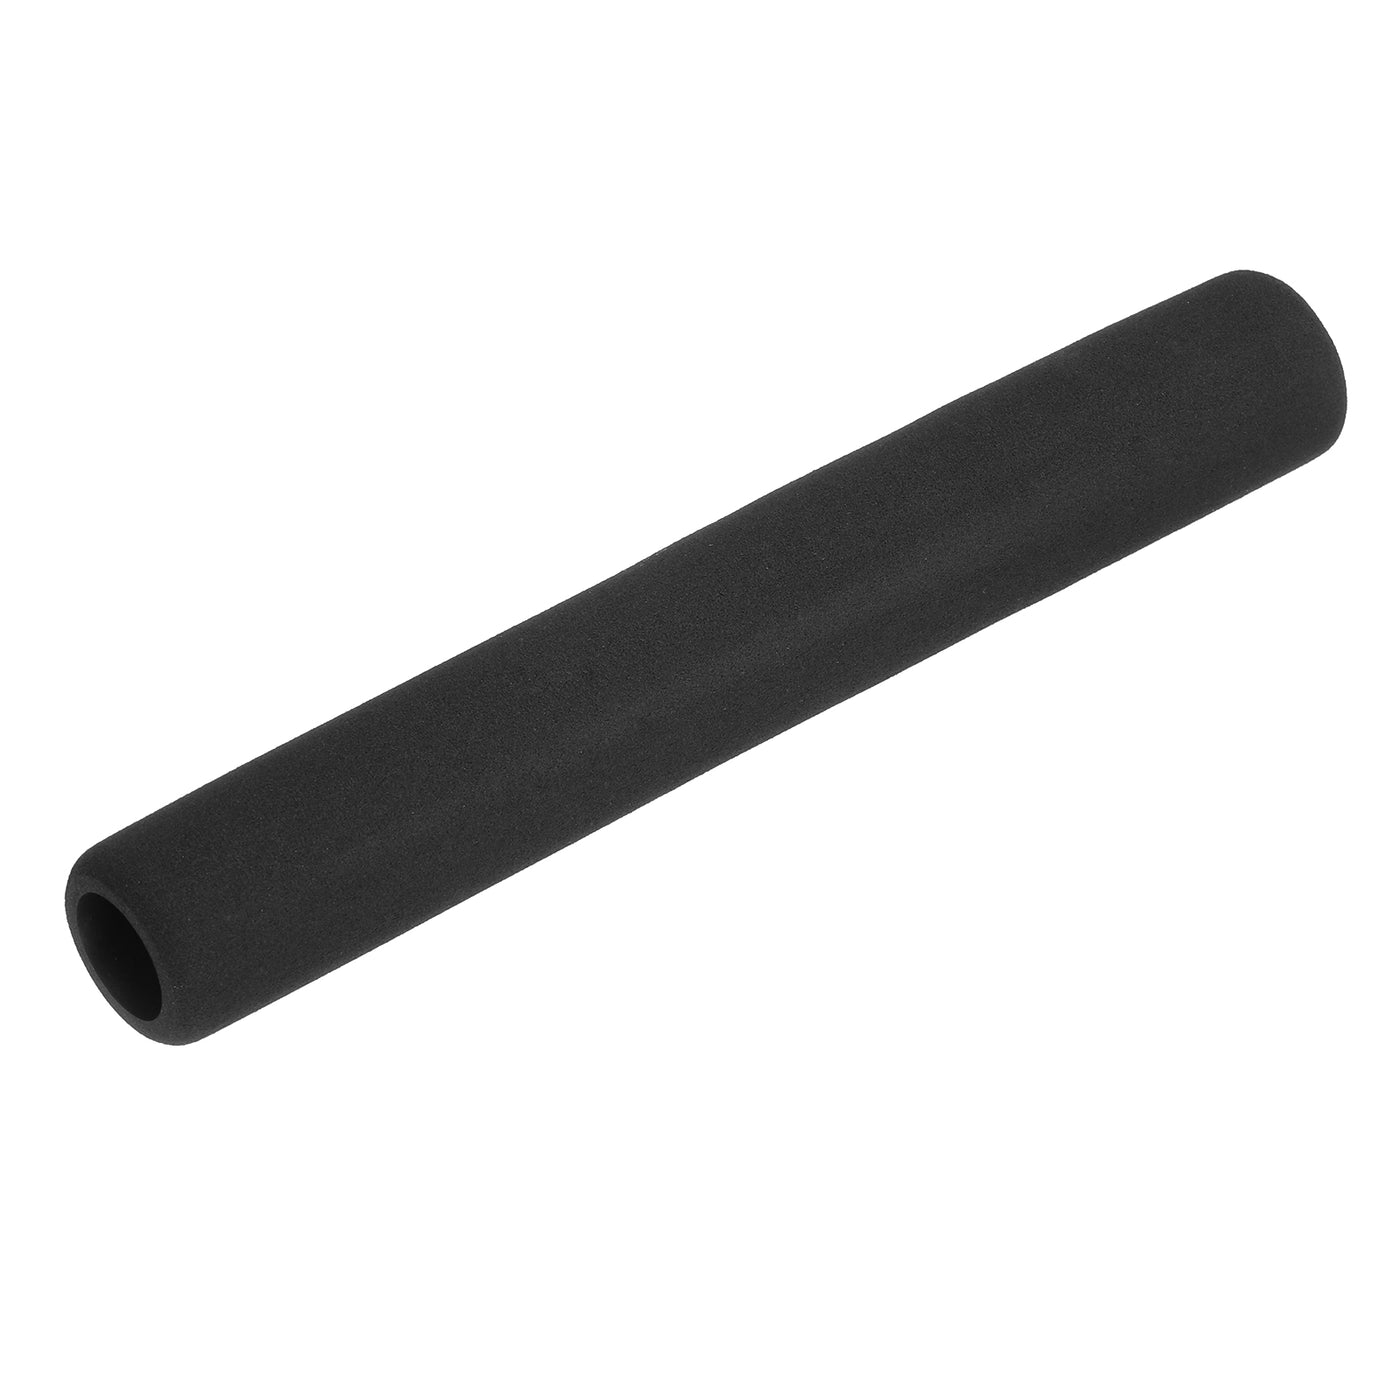 uxcell Uxcell Pipe Insulation Tube Foam Tubing for Handle Grip Support 17mm ID 27mm OD 195mm Heat Preservation Black